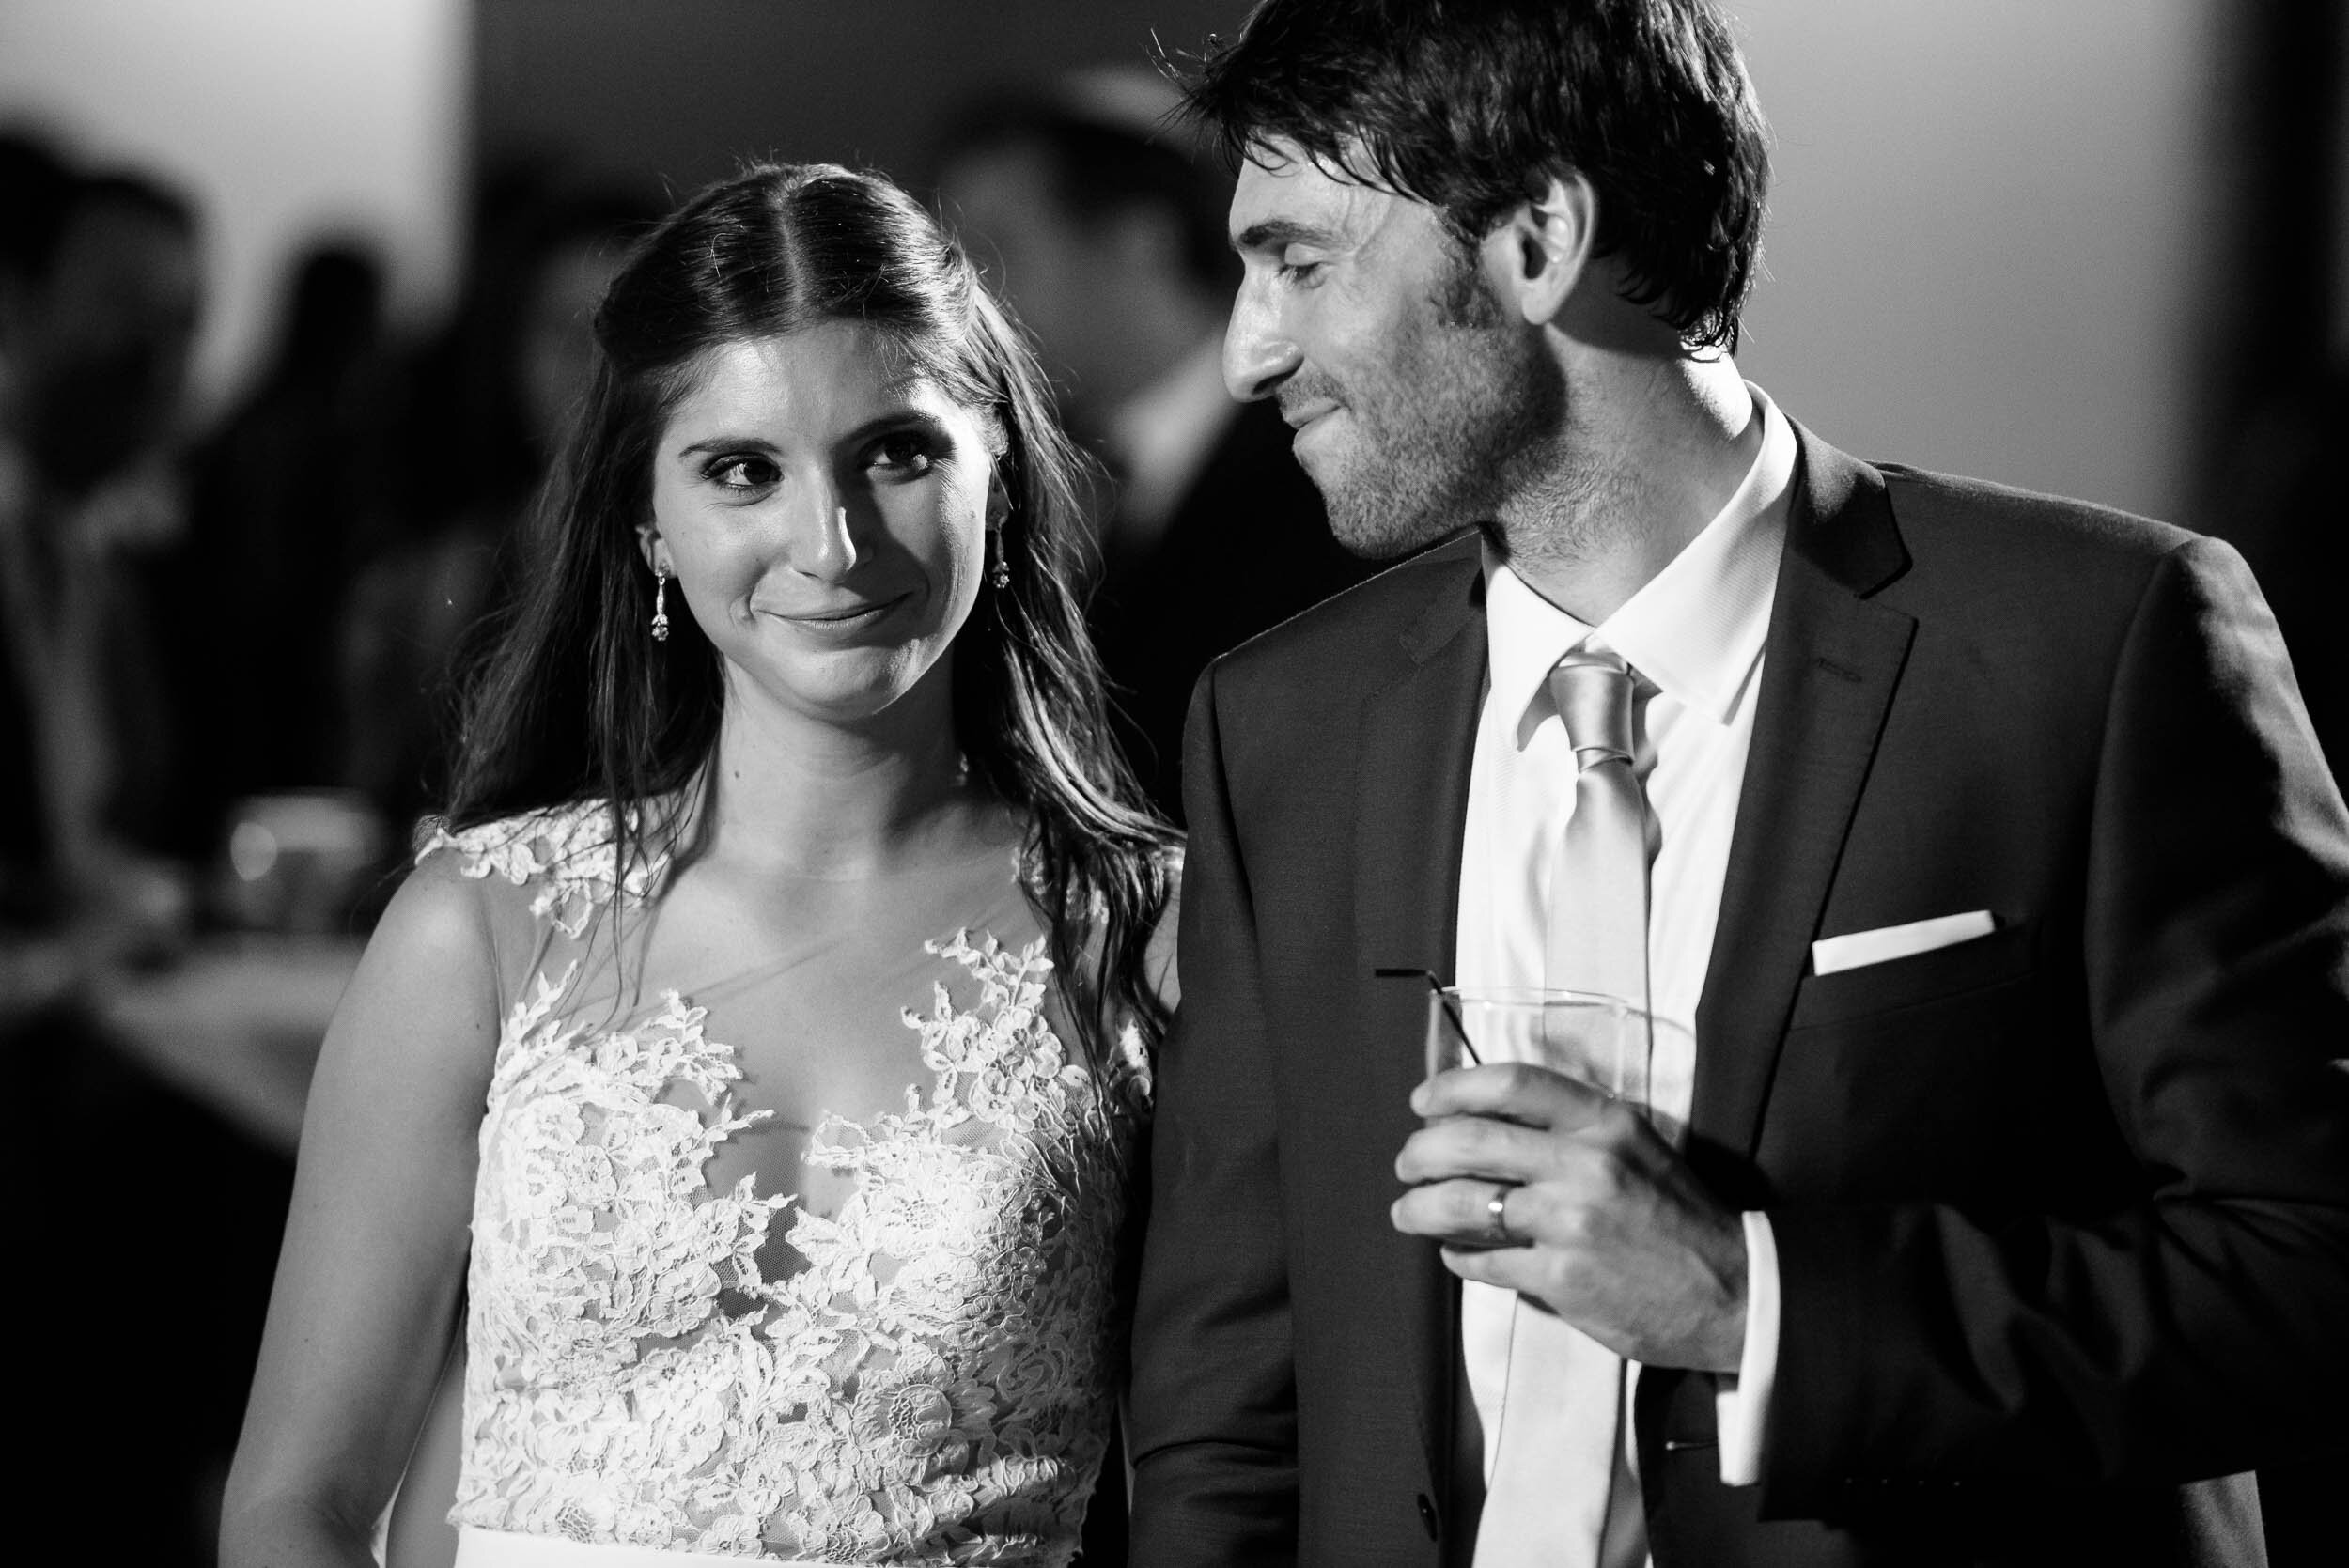 Bride and groom react during the toasts at their reception: Ravenswood Event Center Chicago wedding captured by J. Brown Photography.  